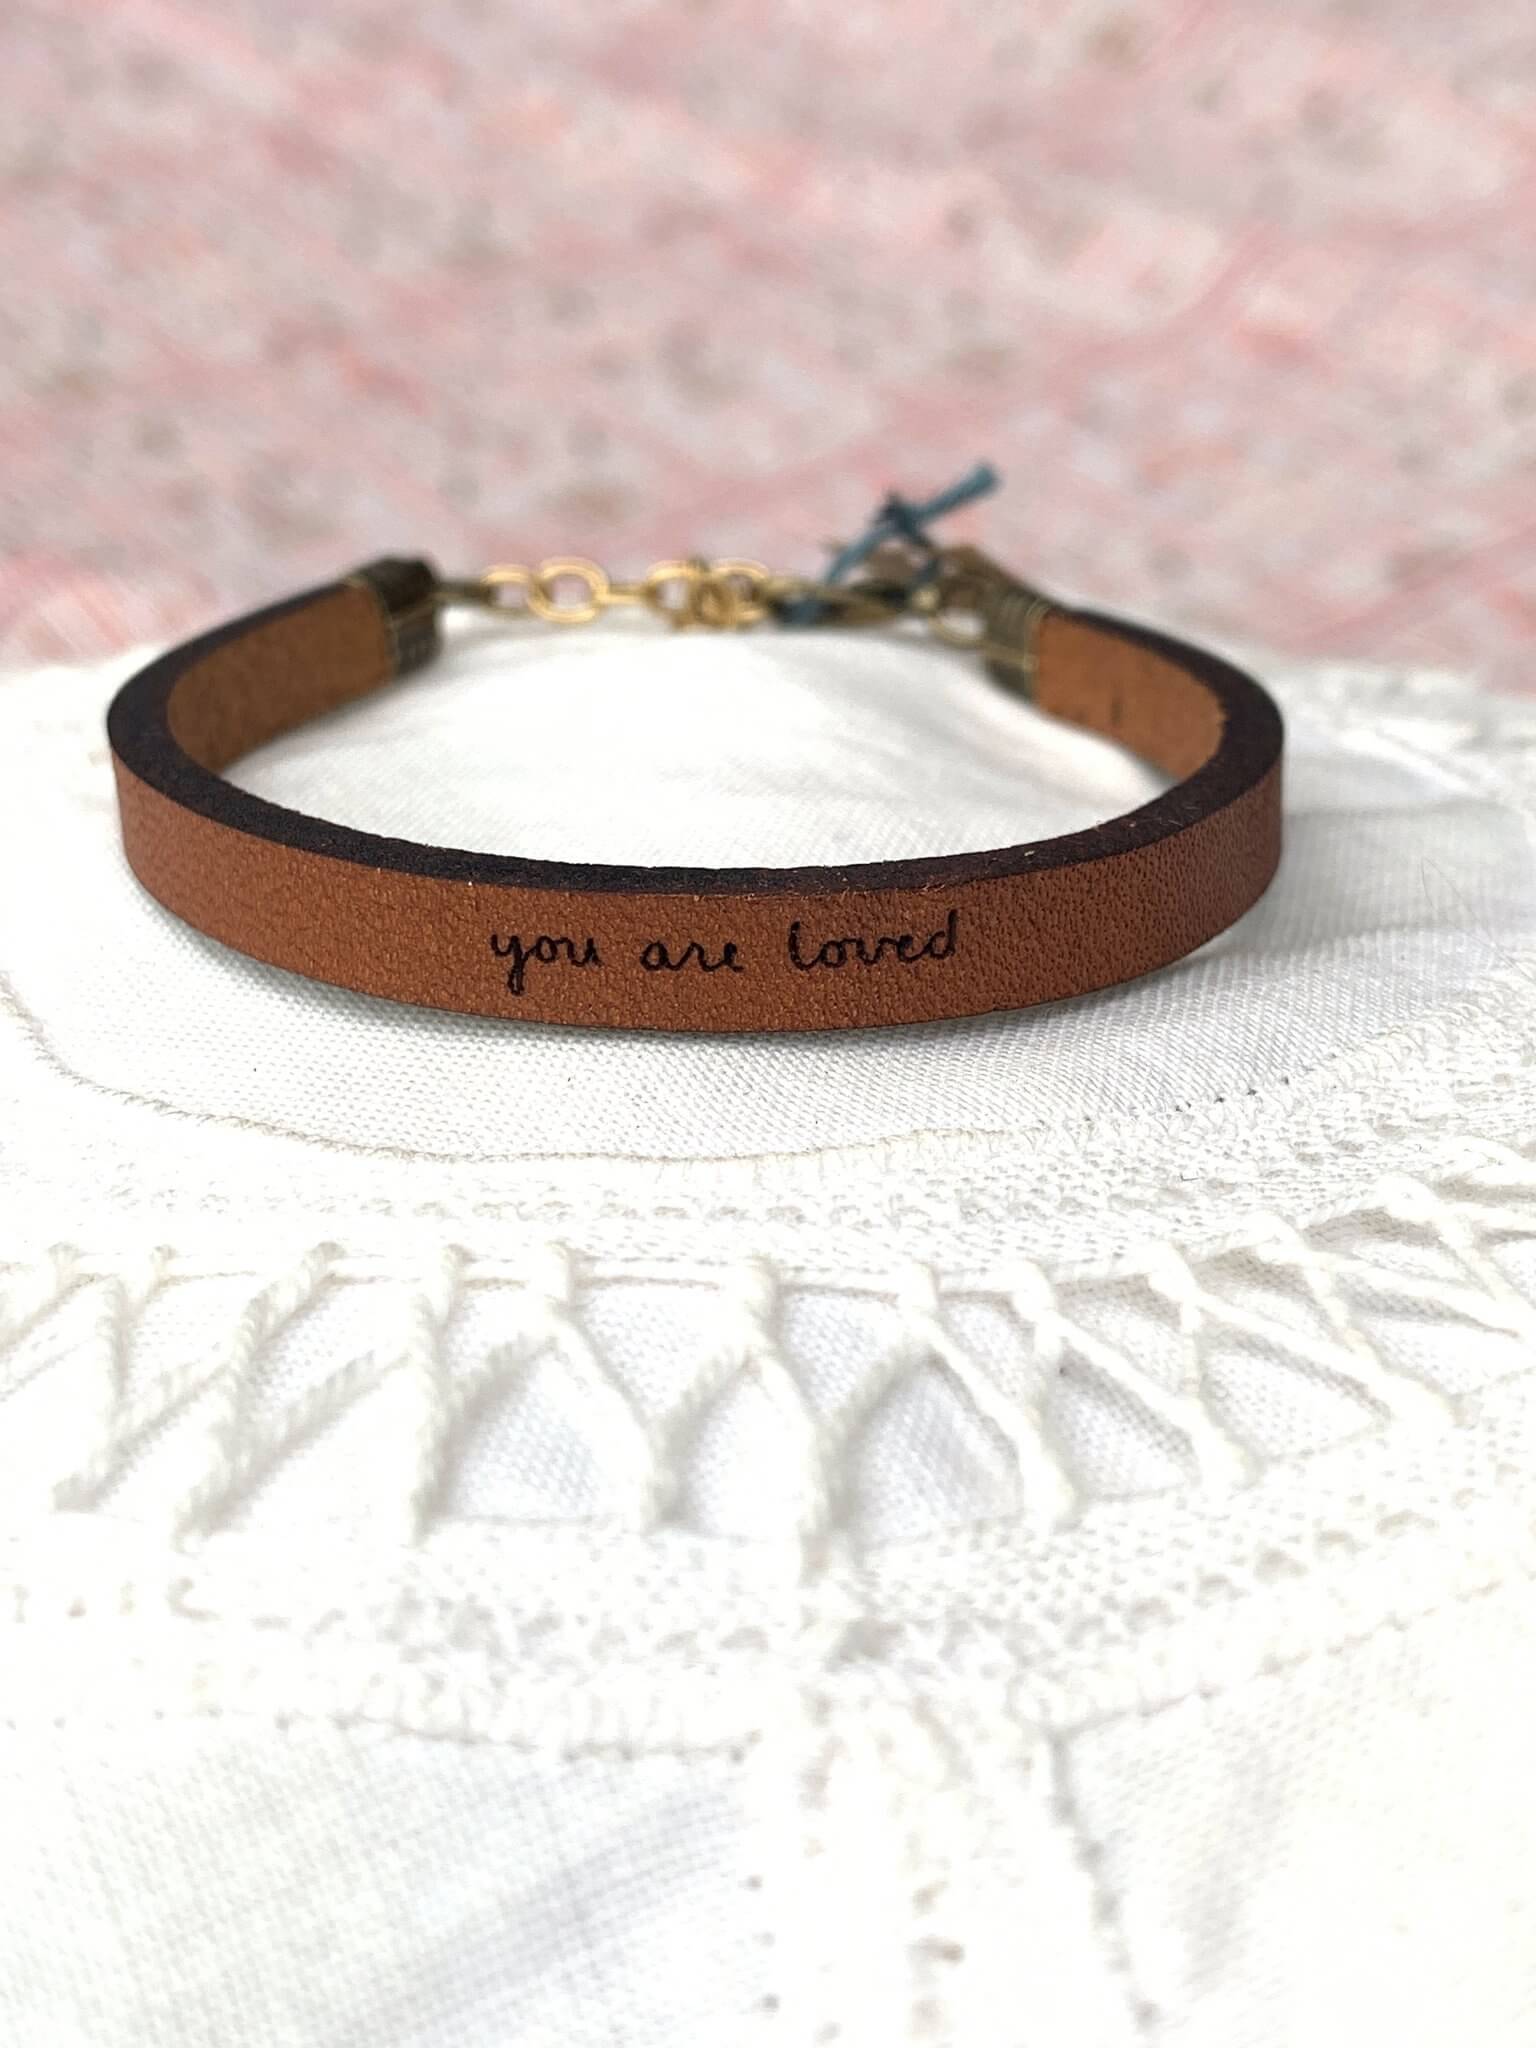 Jennessee Jaynes || You Are Loved
$24.00